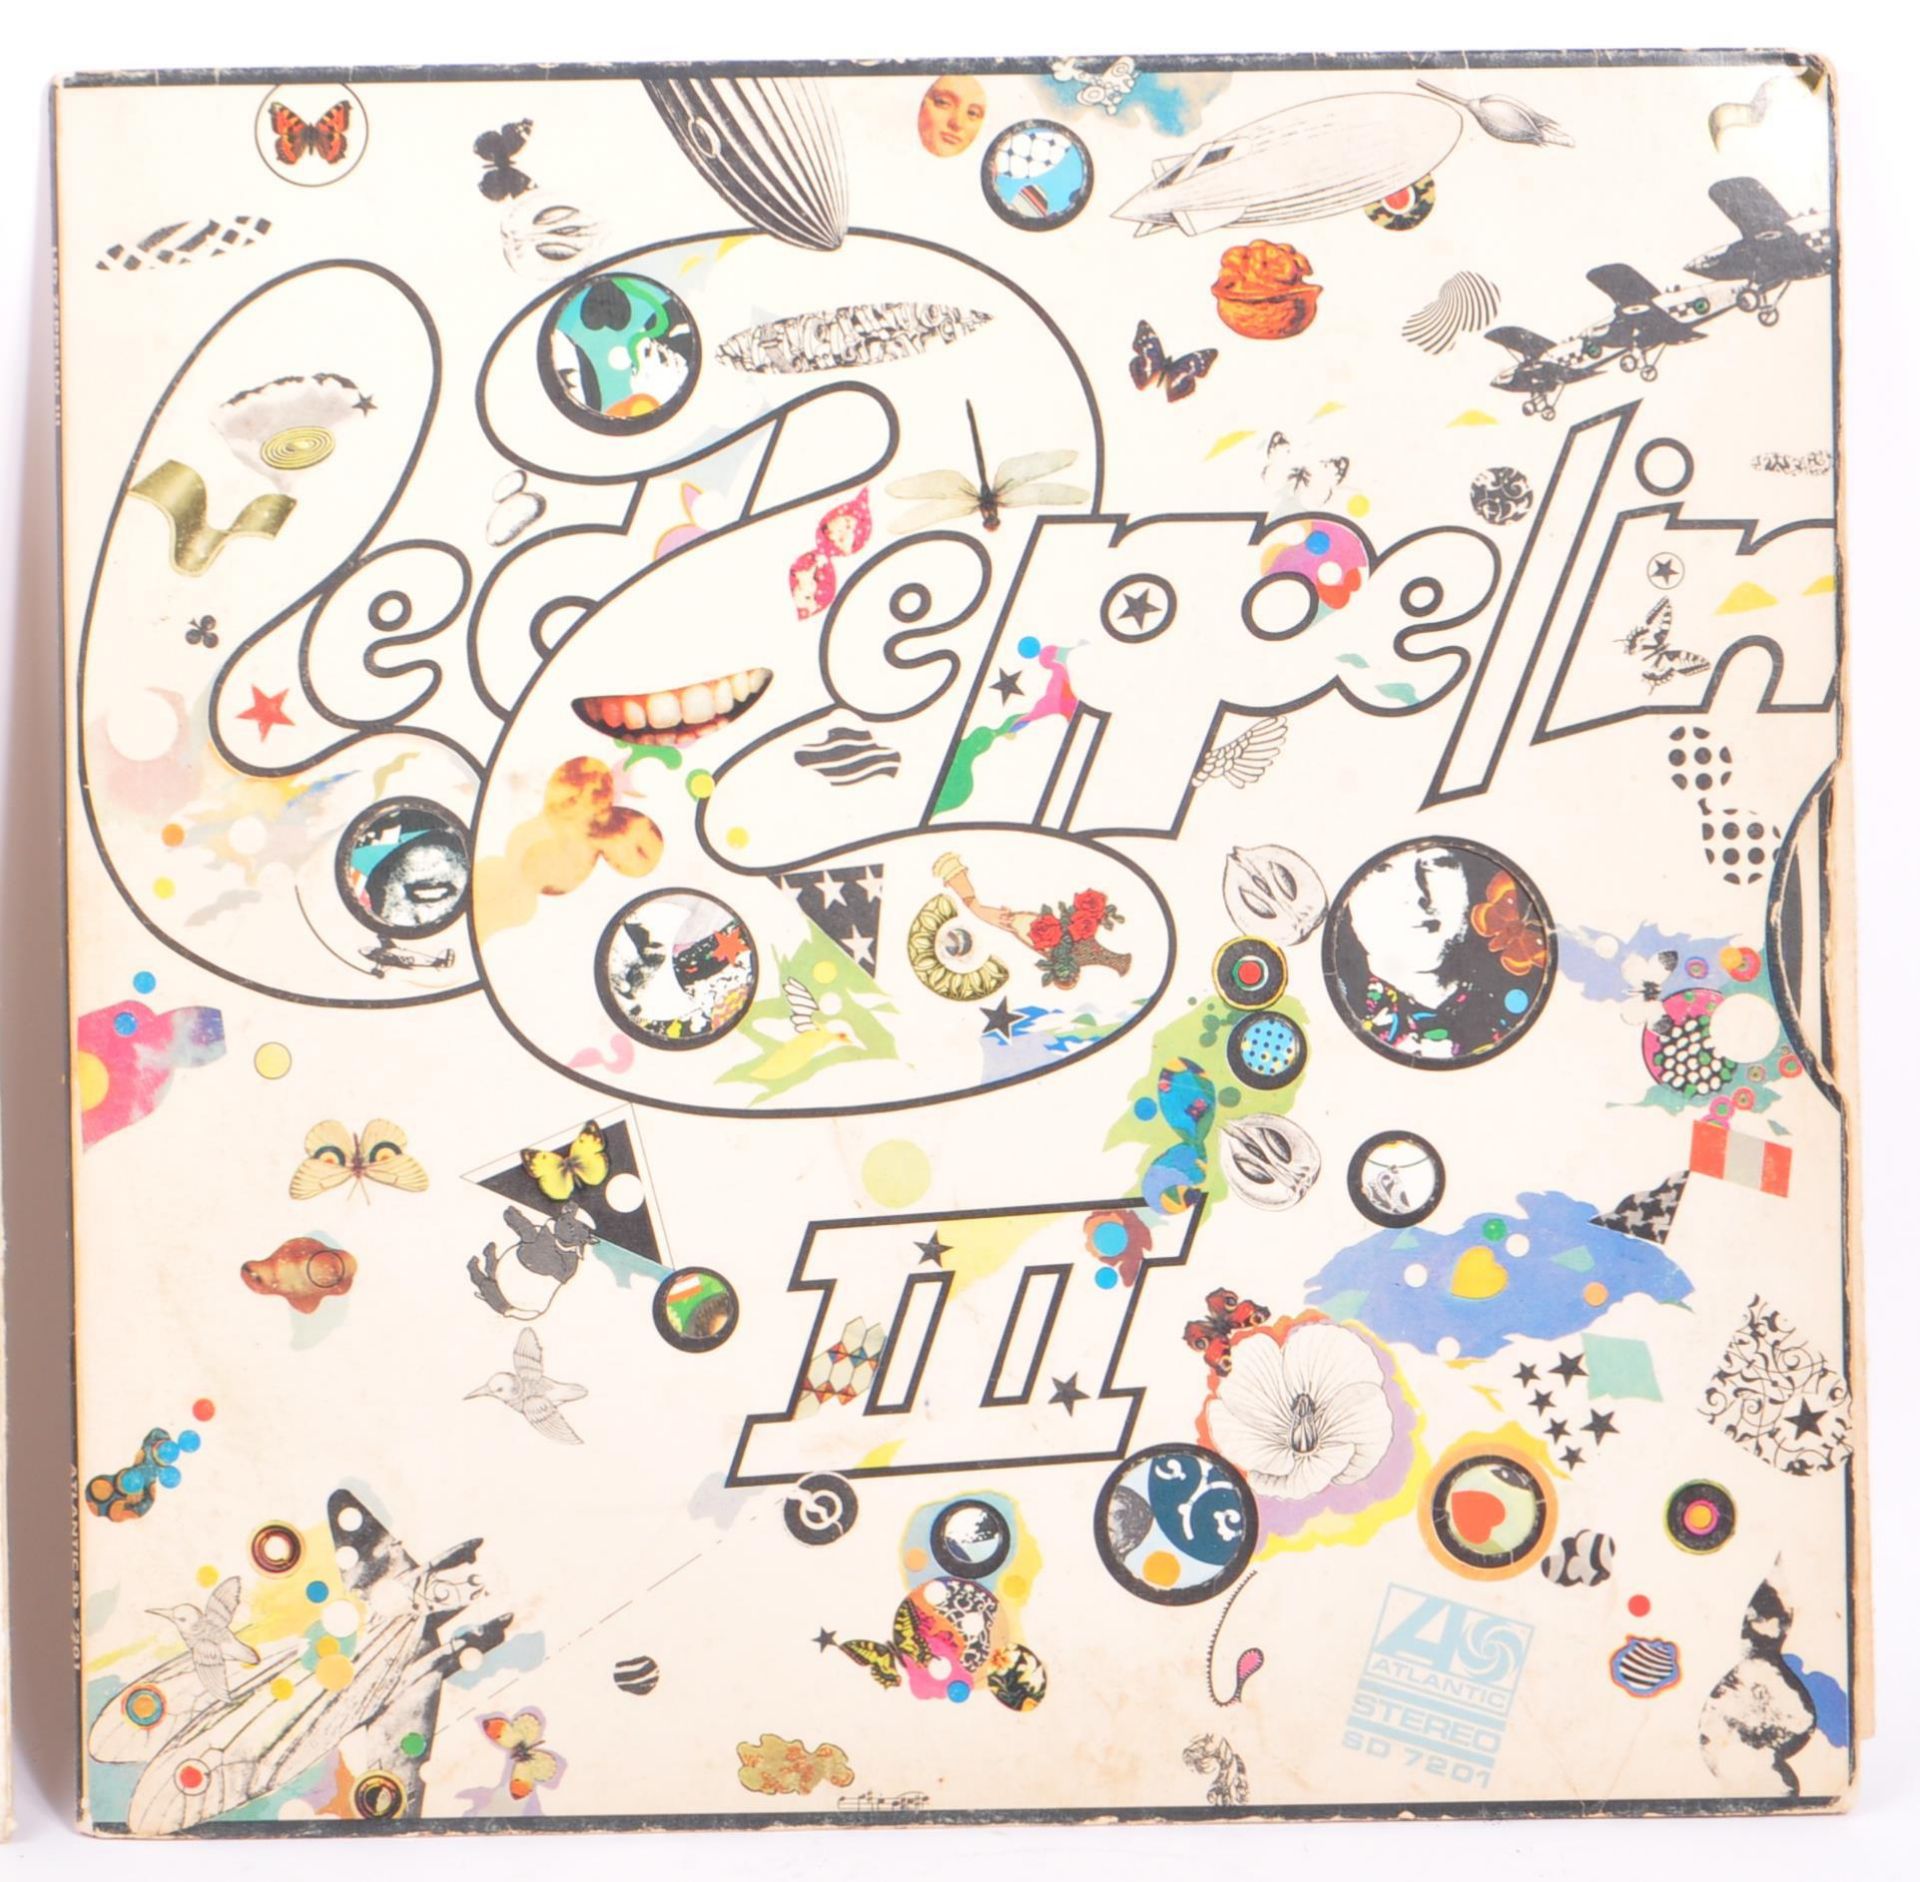 FOUR LED ZEPPELIN / CREAM LONG PLAY 33 RPM VINYL RECORD ALBUMS - Image 2 of 7